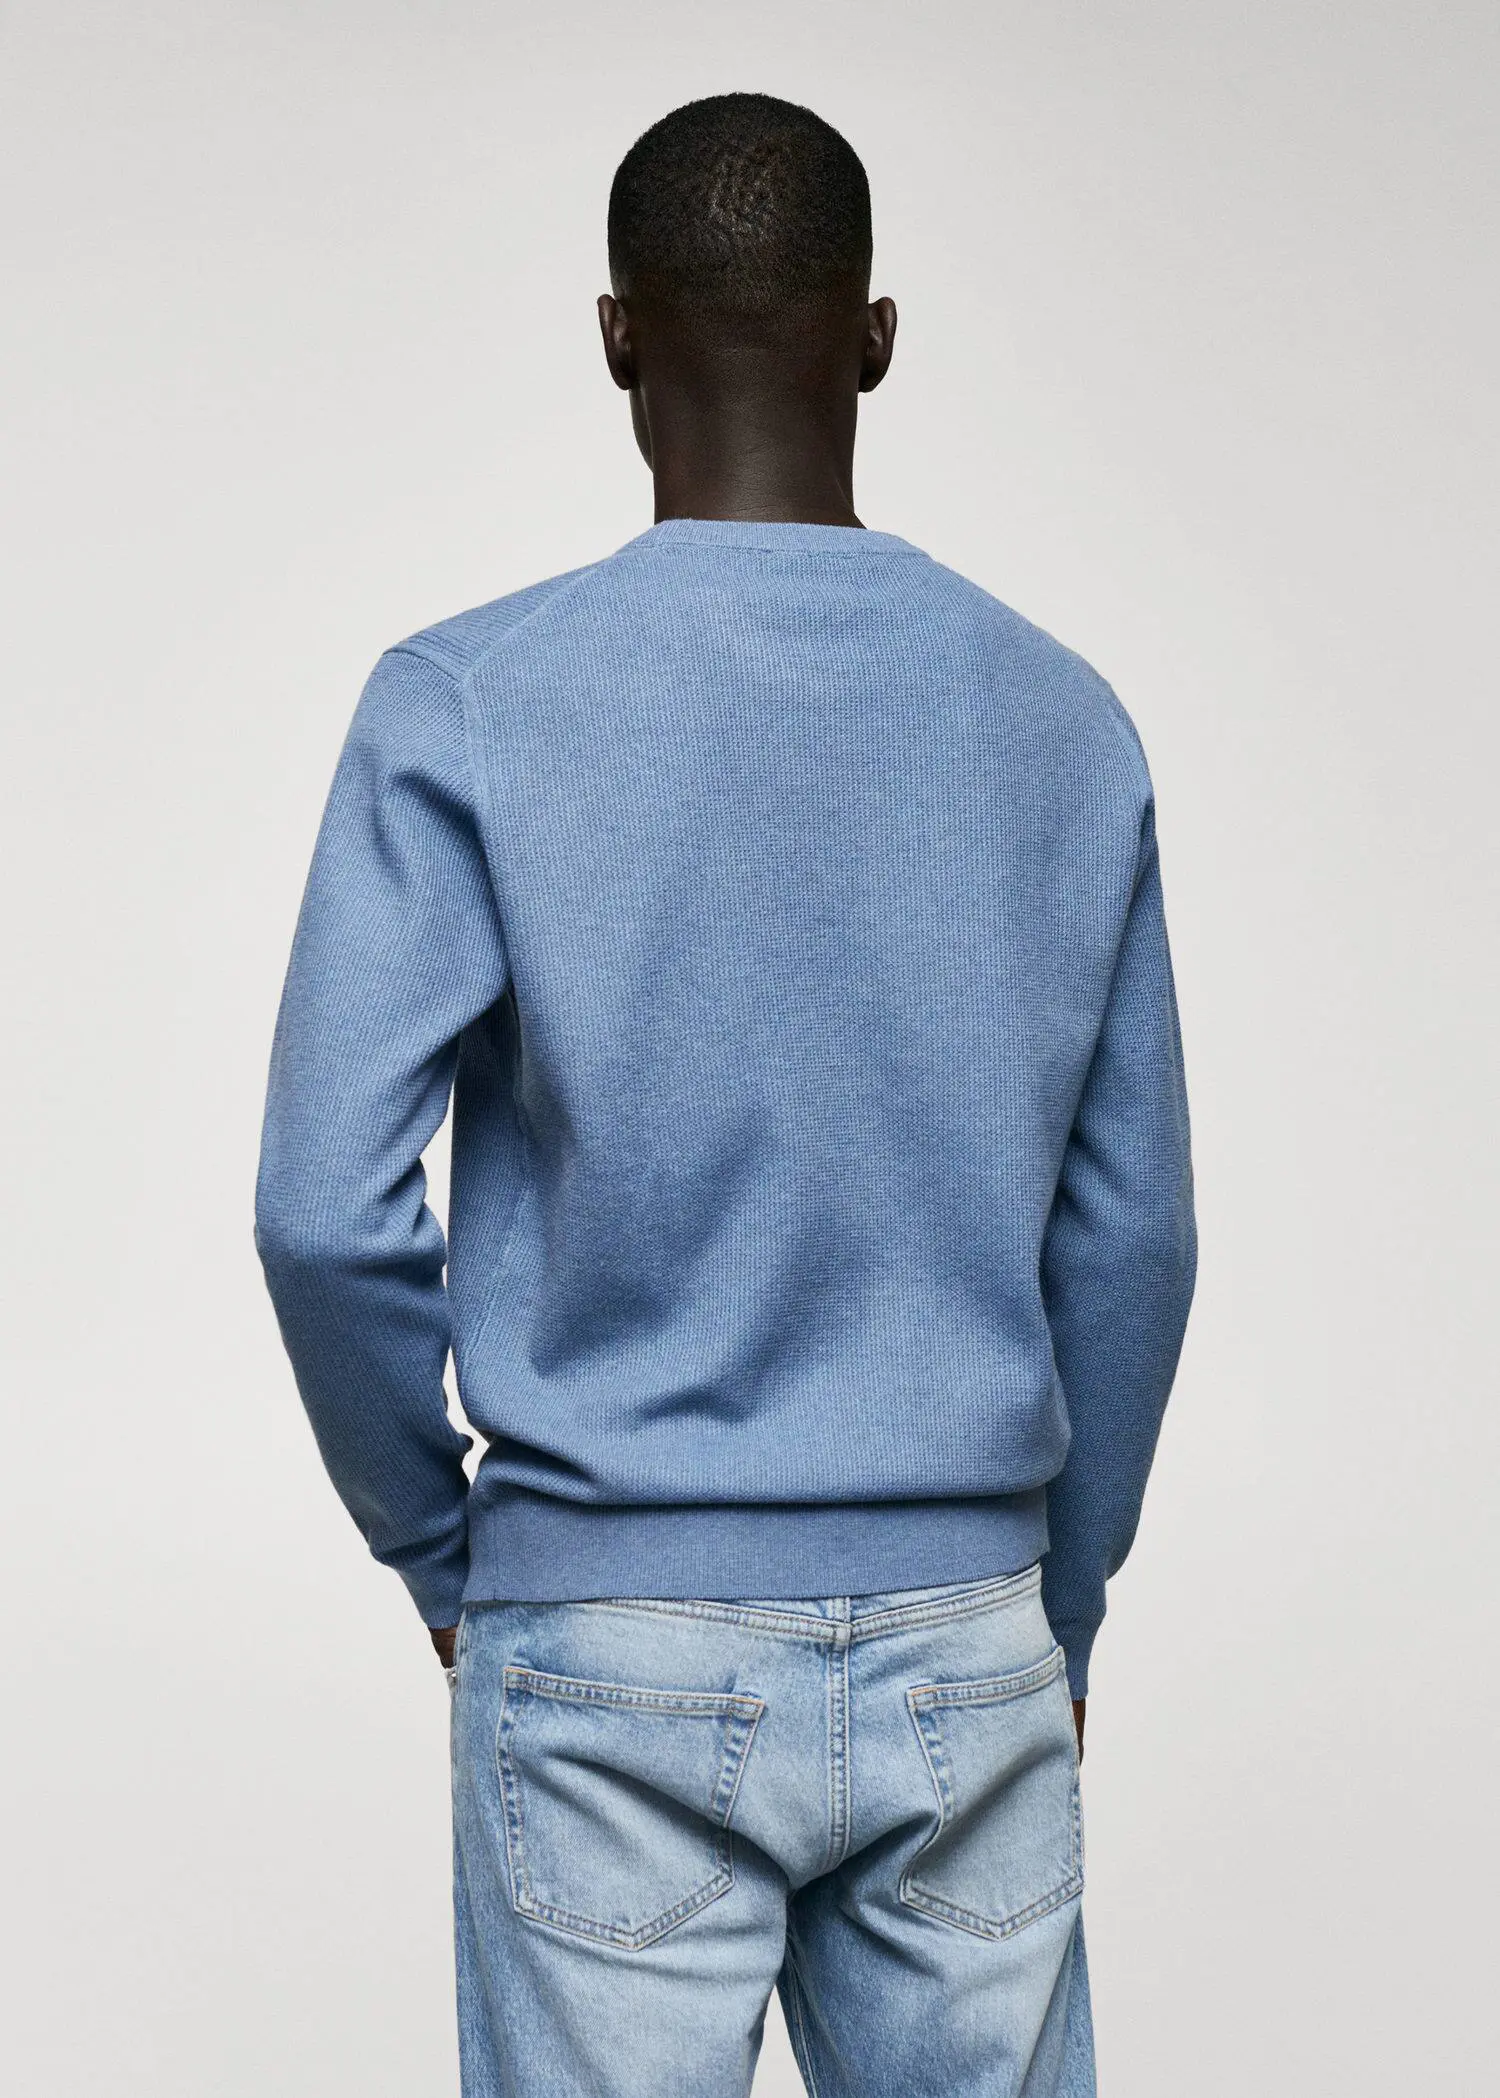 Mango Structured cotton sweater. a person wearing a blue sweatshirt and jeans. 